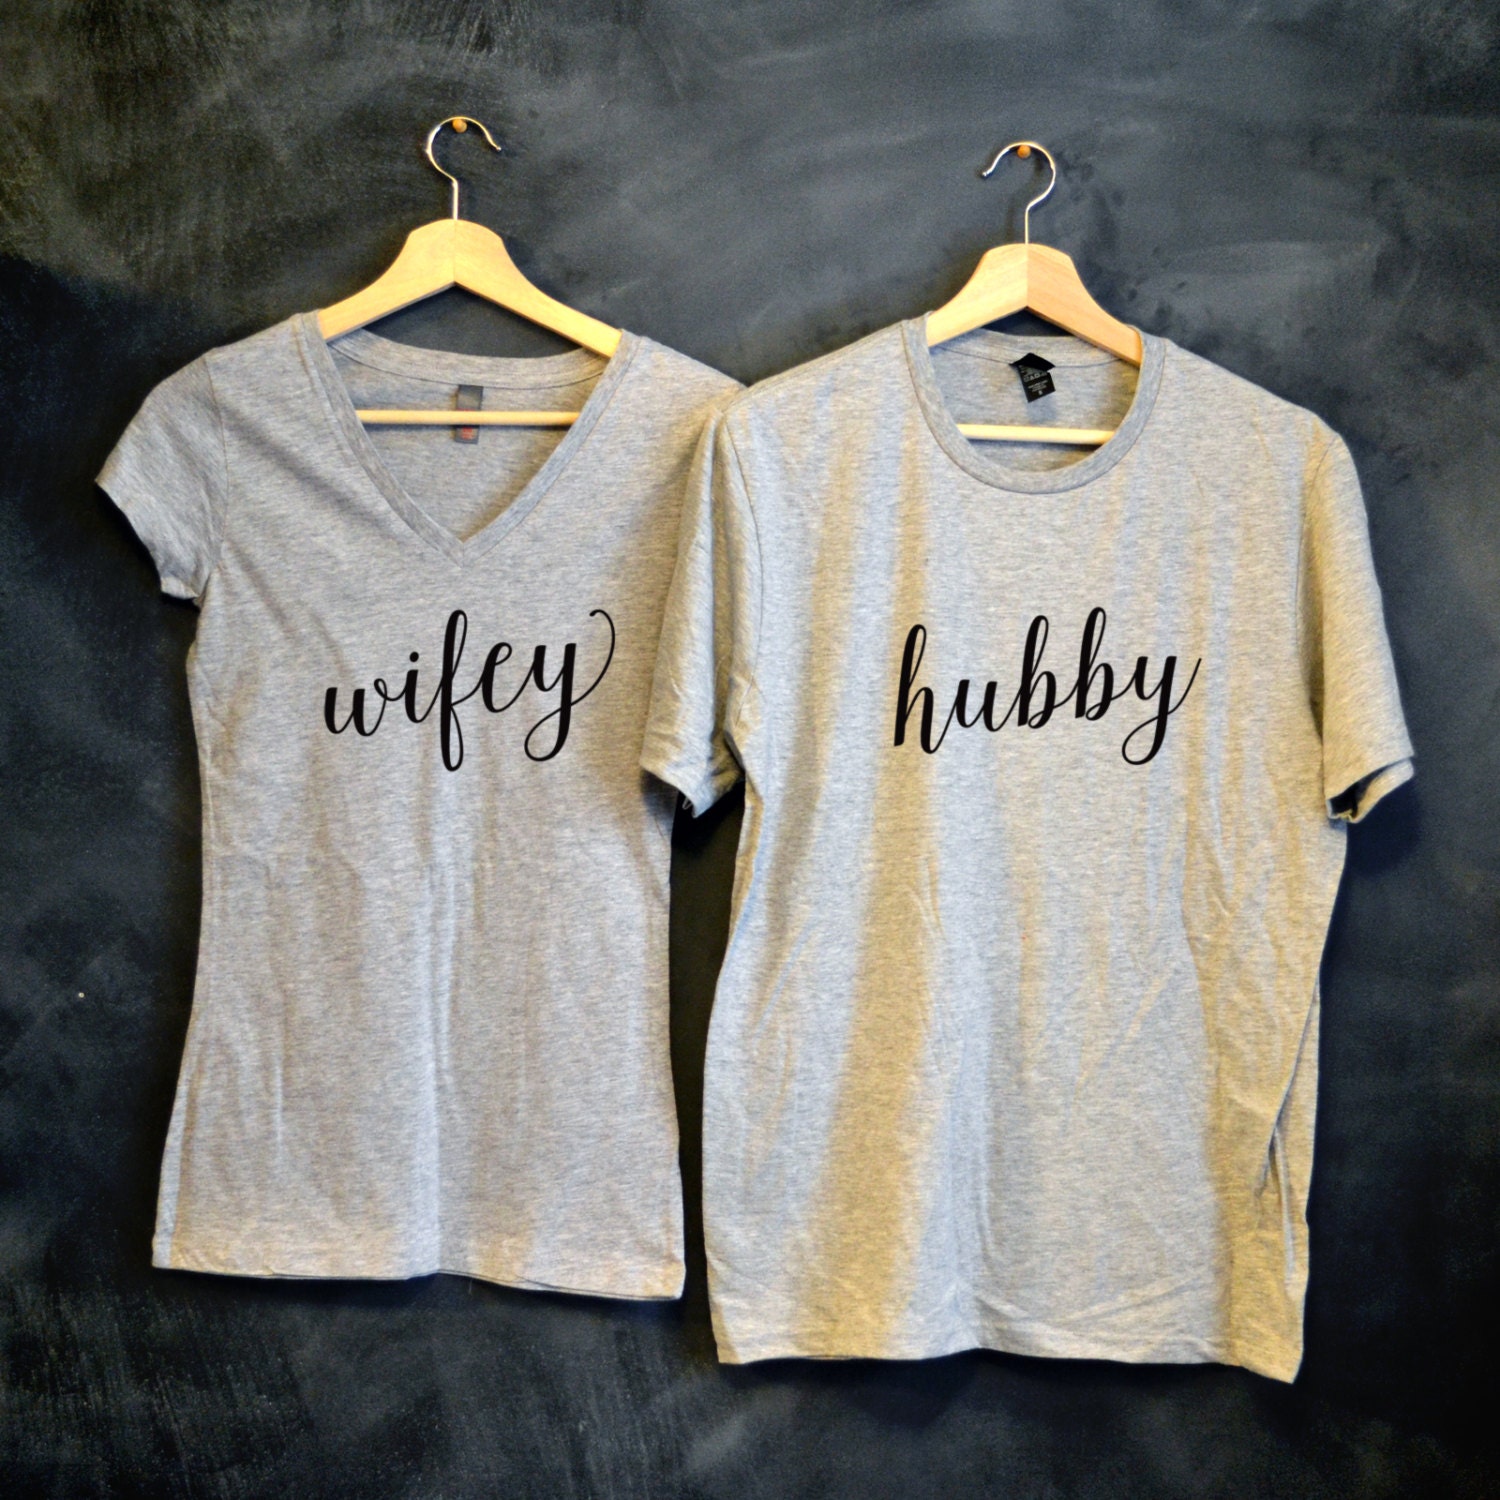 Hubby And Wifey T Shirt Package Wedding T Bridal Shower